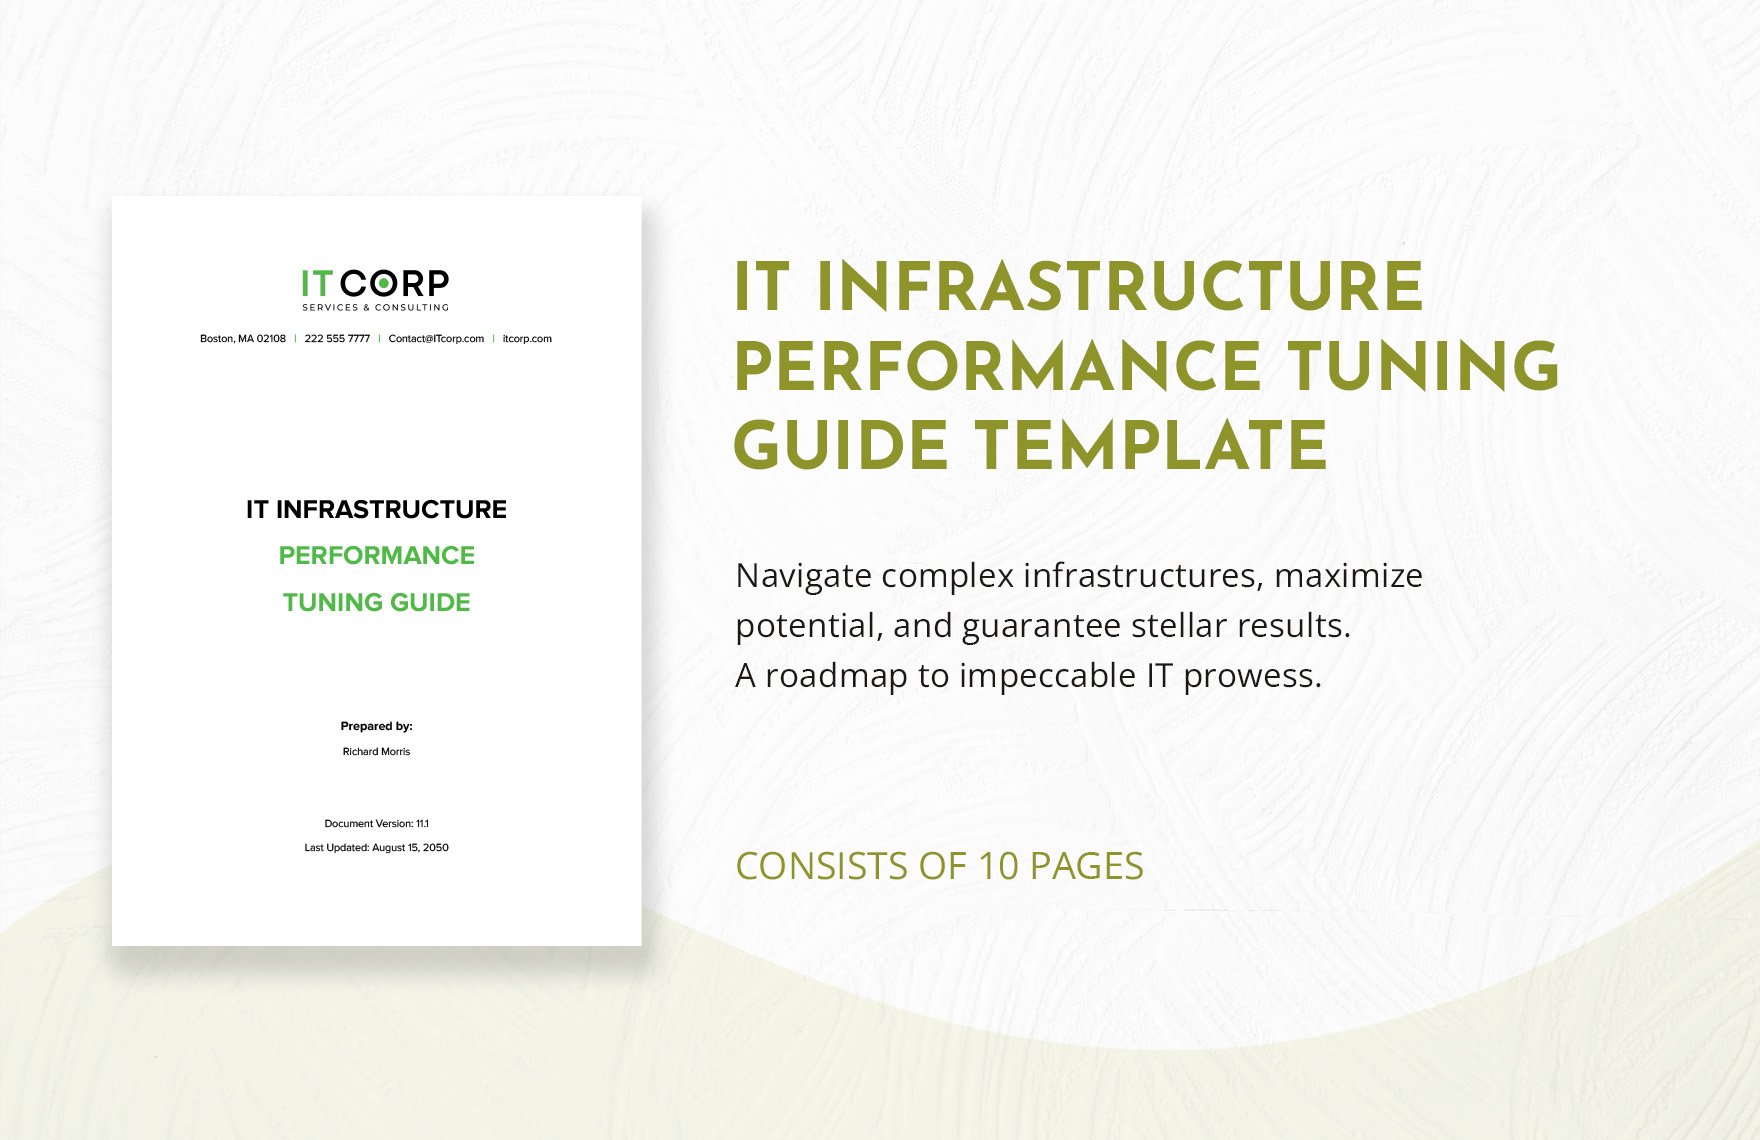 IT Infrastructure Performance Tuning Guide Template